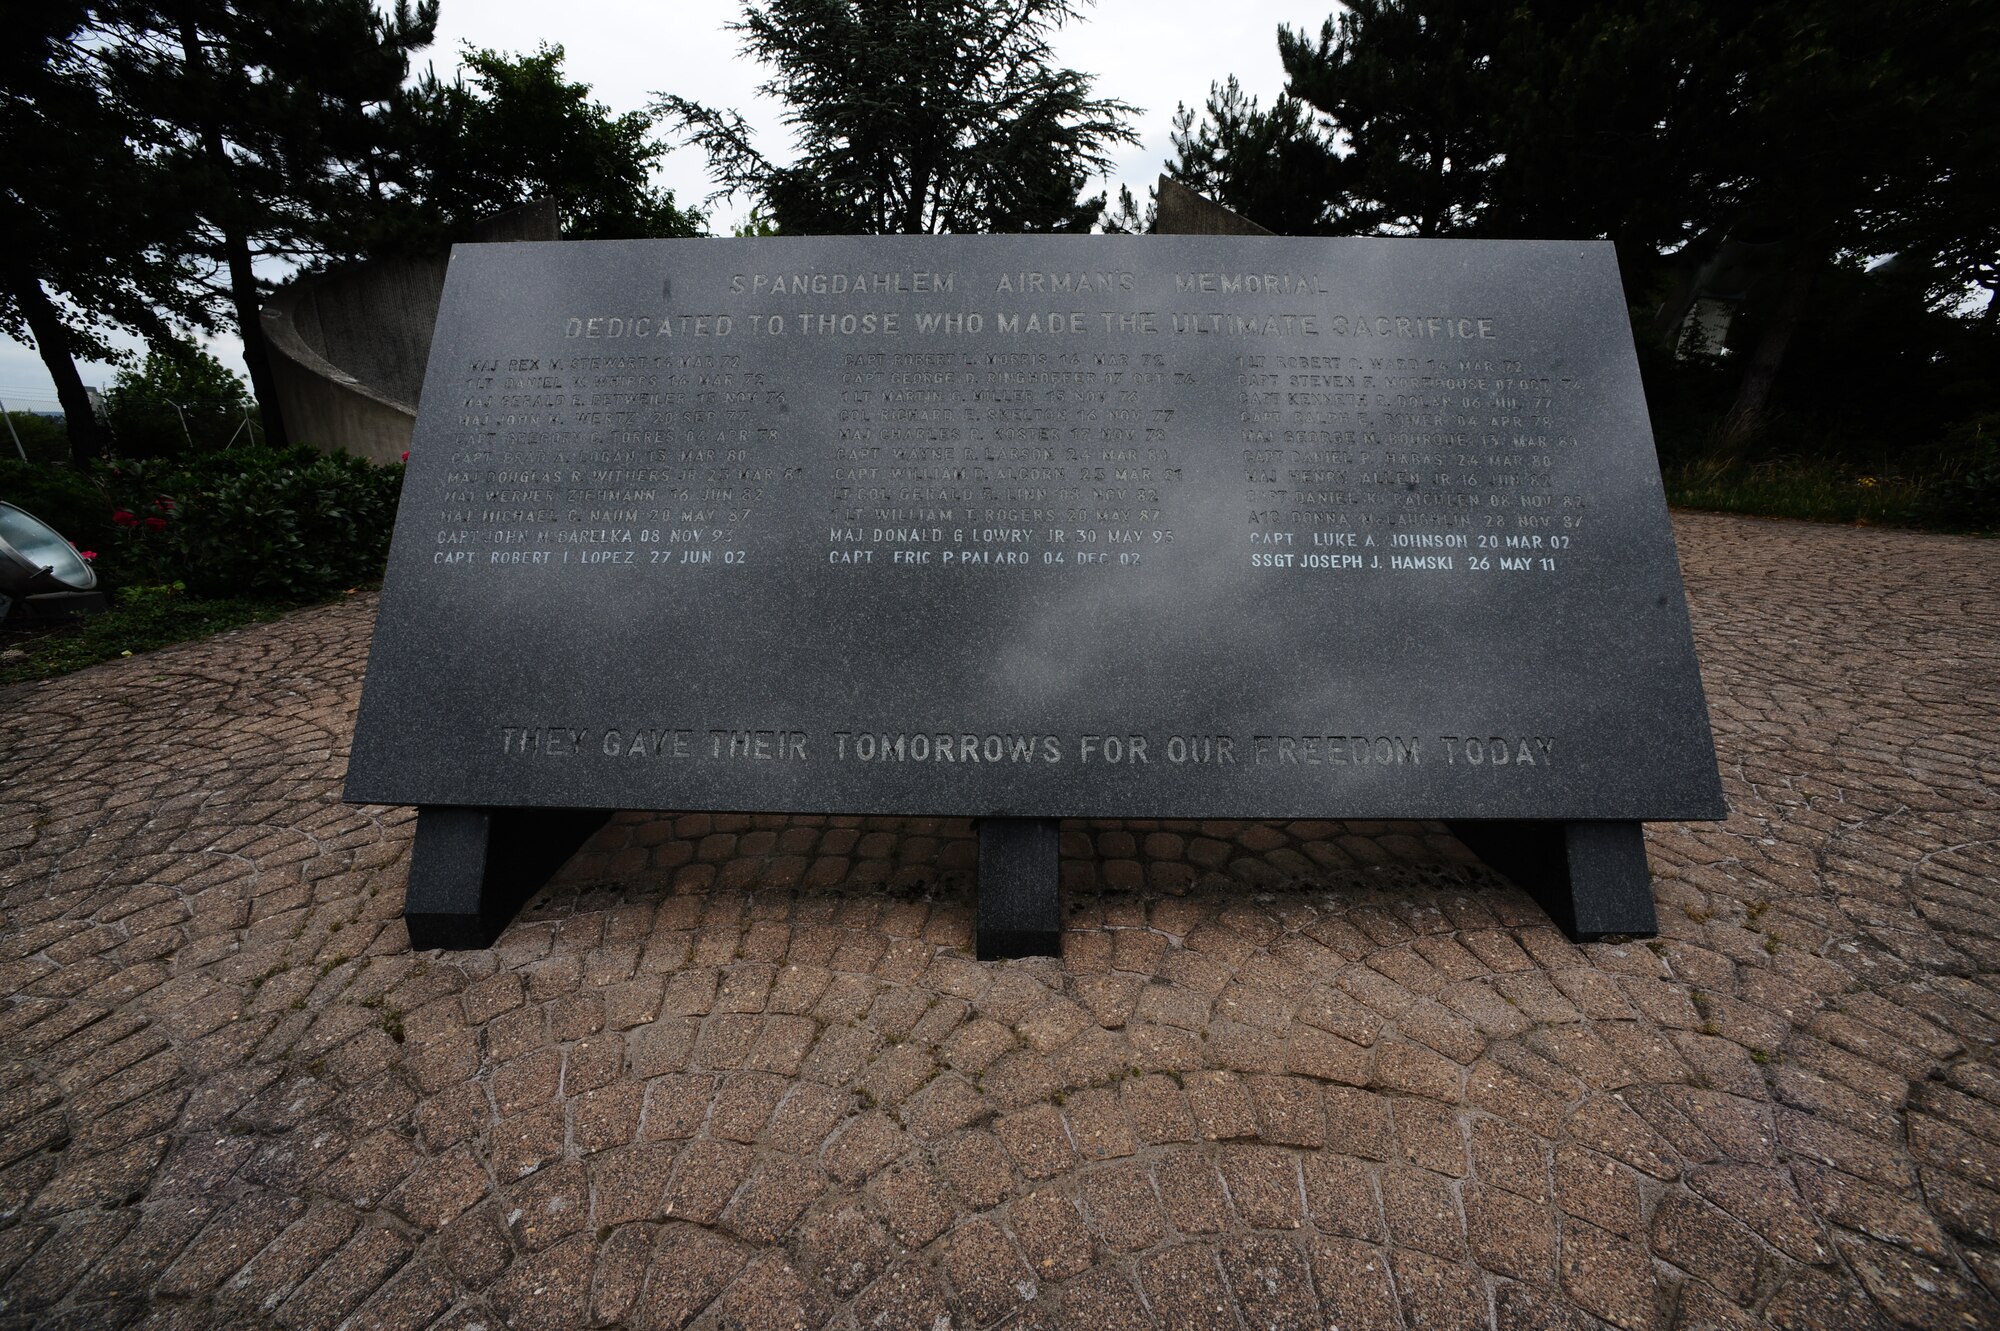 SPANGDAHLEM AIR BASE, Germany – The Spangdahlem Air Base Airman’s Memorial has the name of Staff Sgt. Joseph J. Hamski, 52nd Civil Engineer Squadron Explosive Ordnance Disposal Flight, engraved in his honor here June 16. Sergeant Hamski was killed in action May 26, 2011, in Shorabak, Afghanistan, while responding to a known enemy weapons cache. (U.S. Air Force photo/Senior Airman Nathanael Callon)